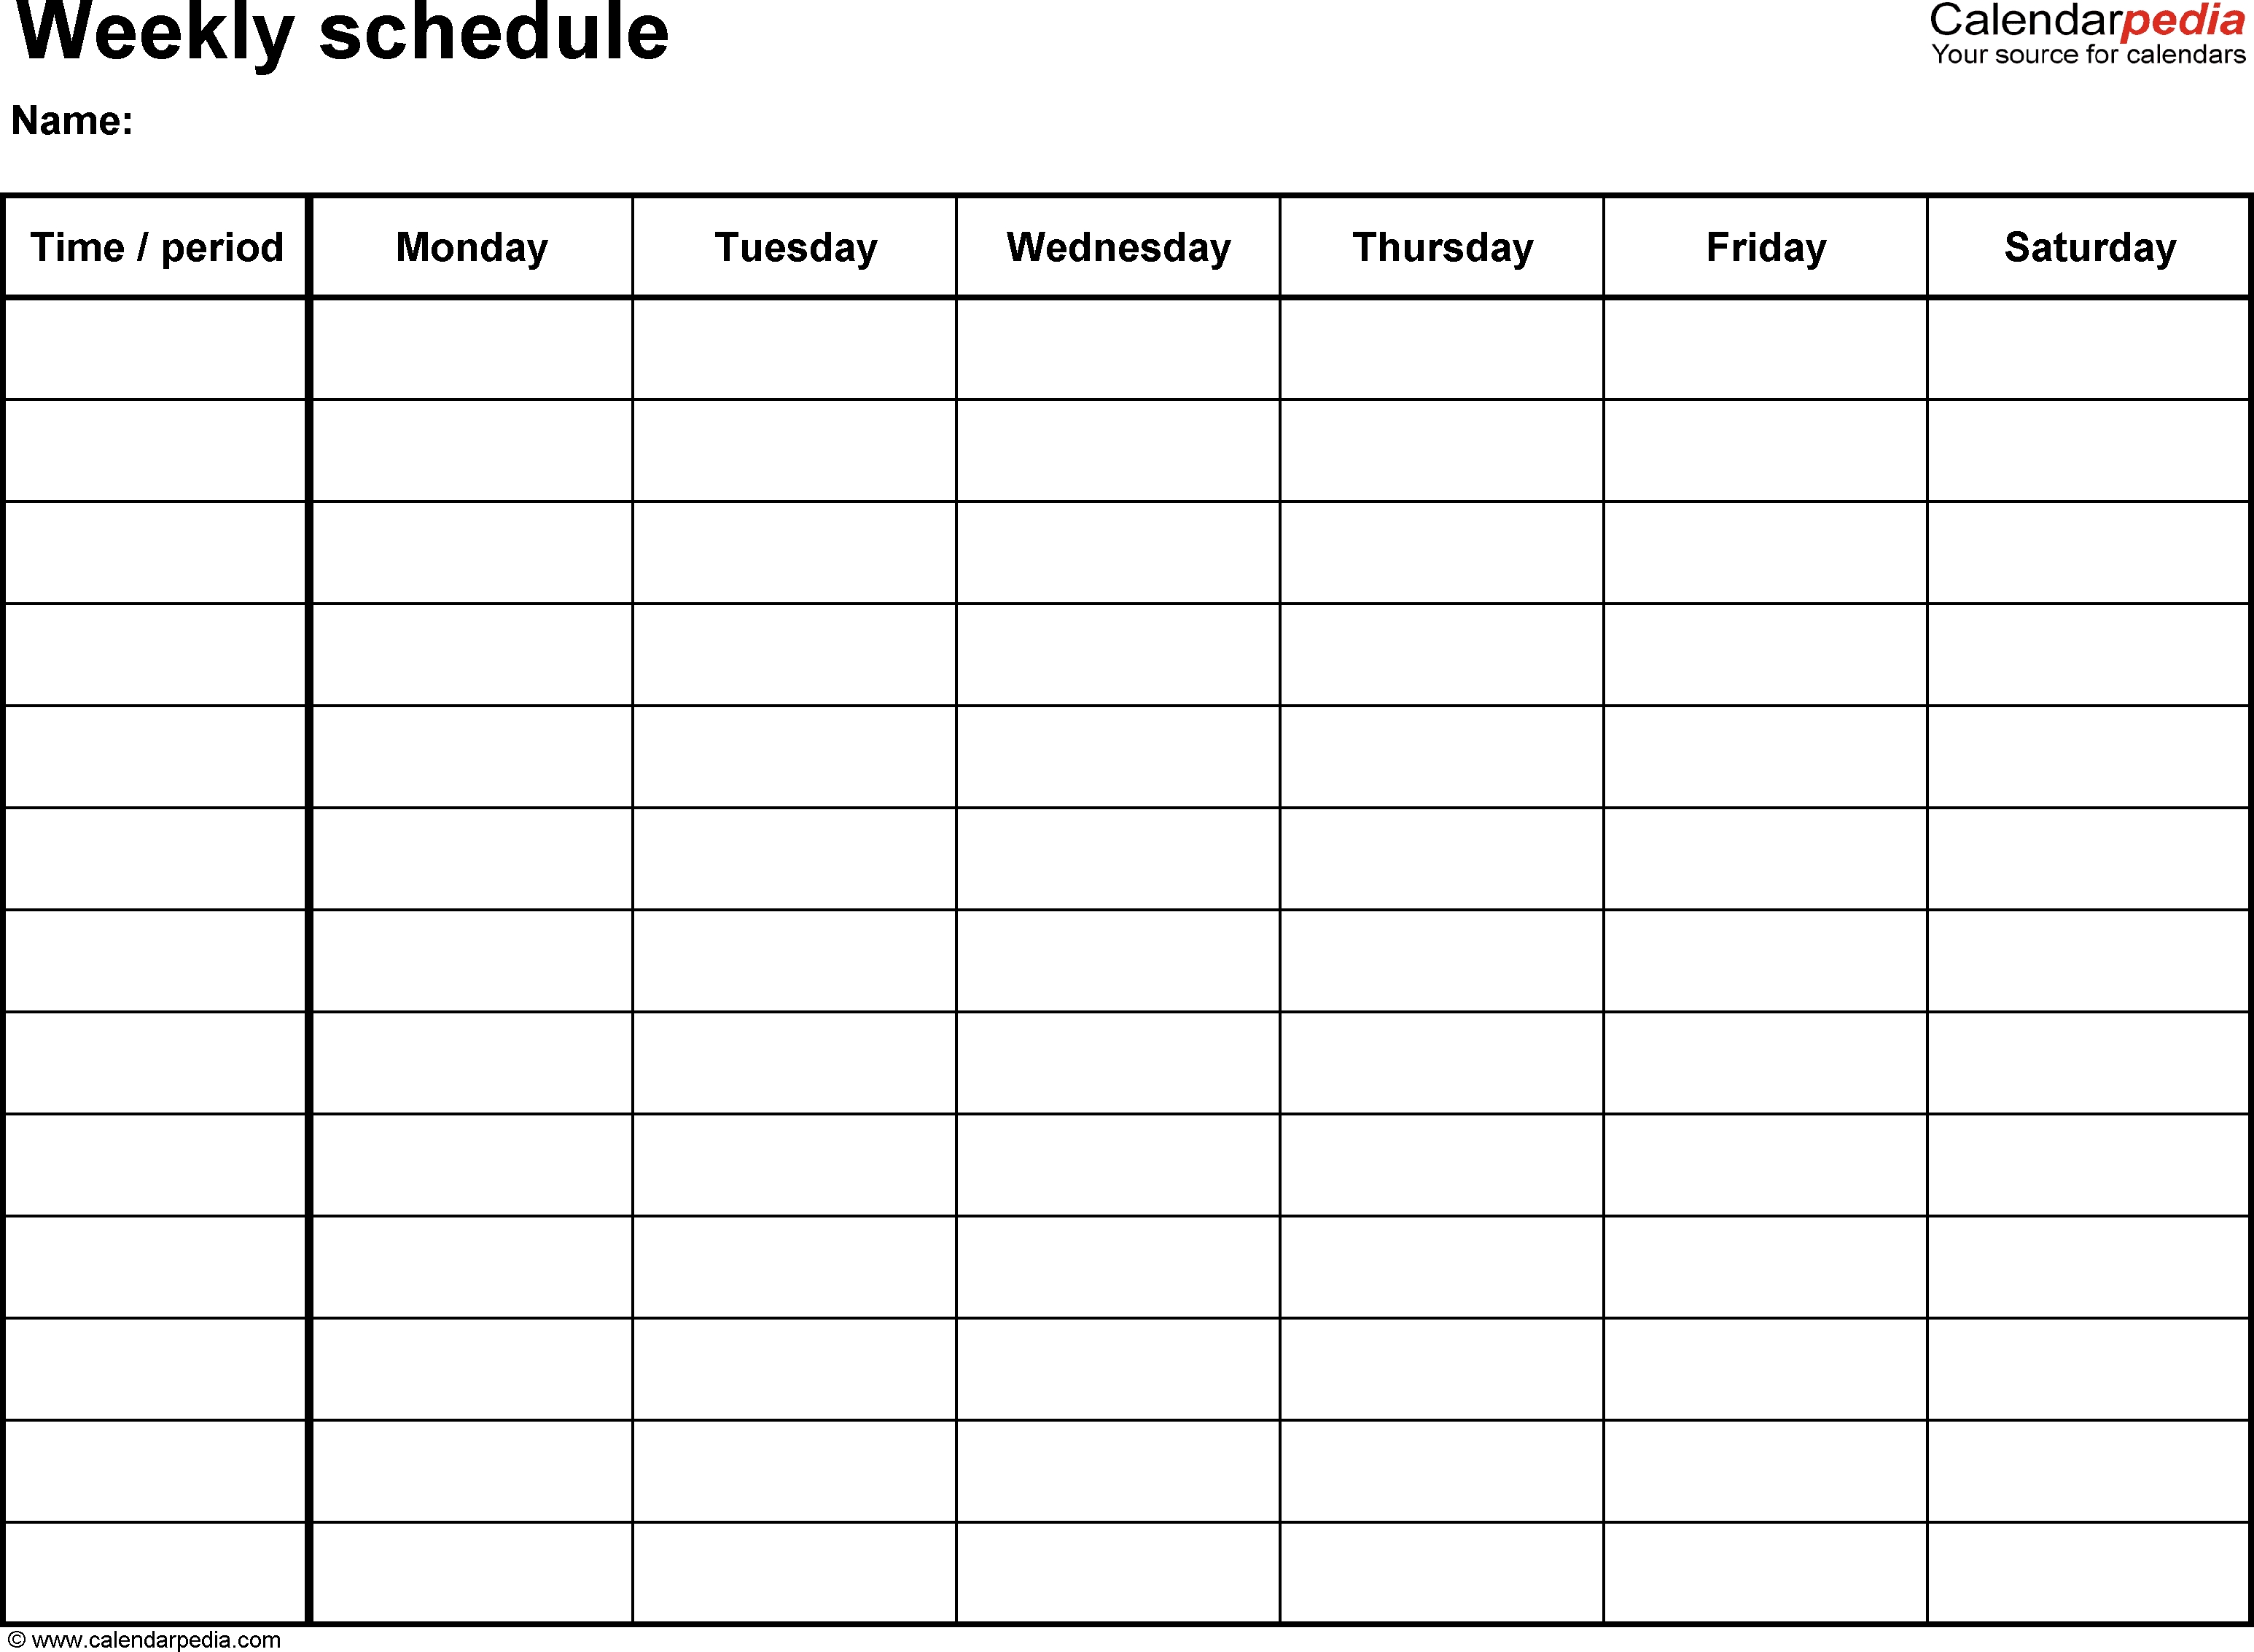 Free Weekly Schedule Templates For Word - 18 Templates throughout A Peek At The Week Free Printable Weekly Planner